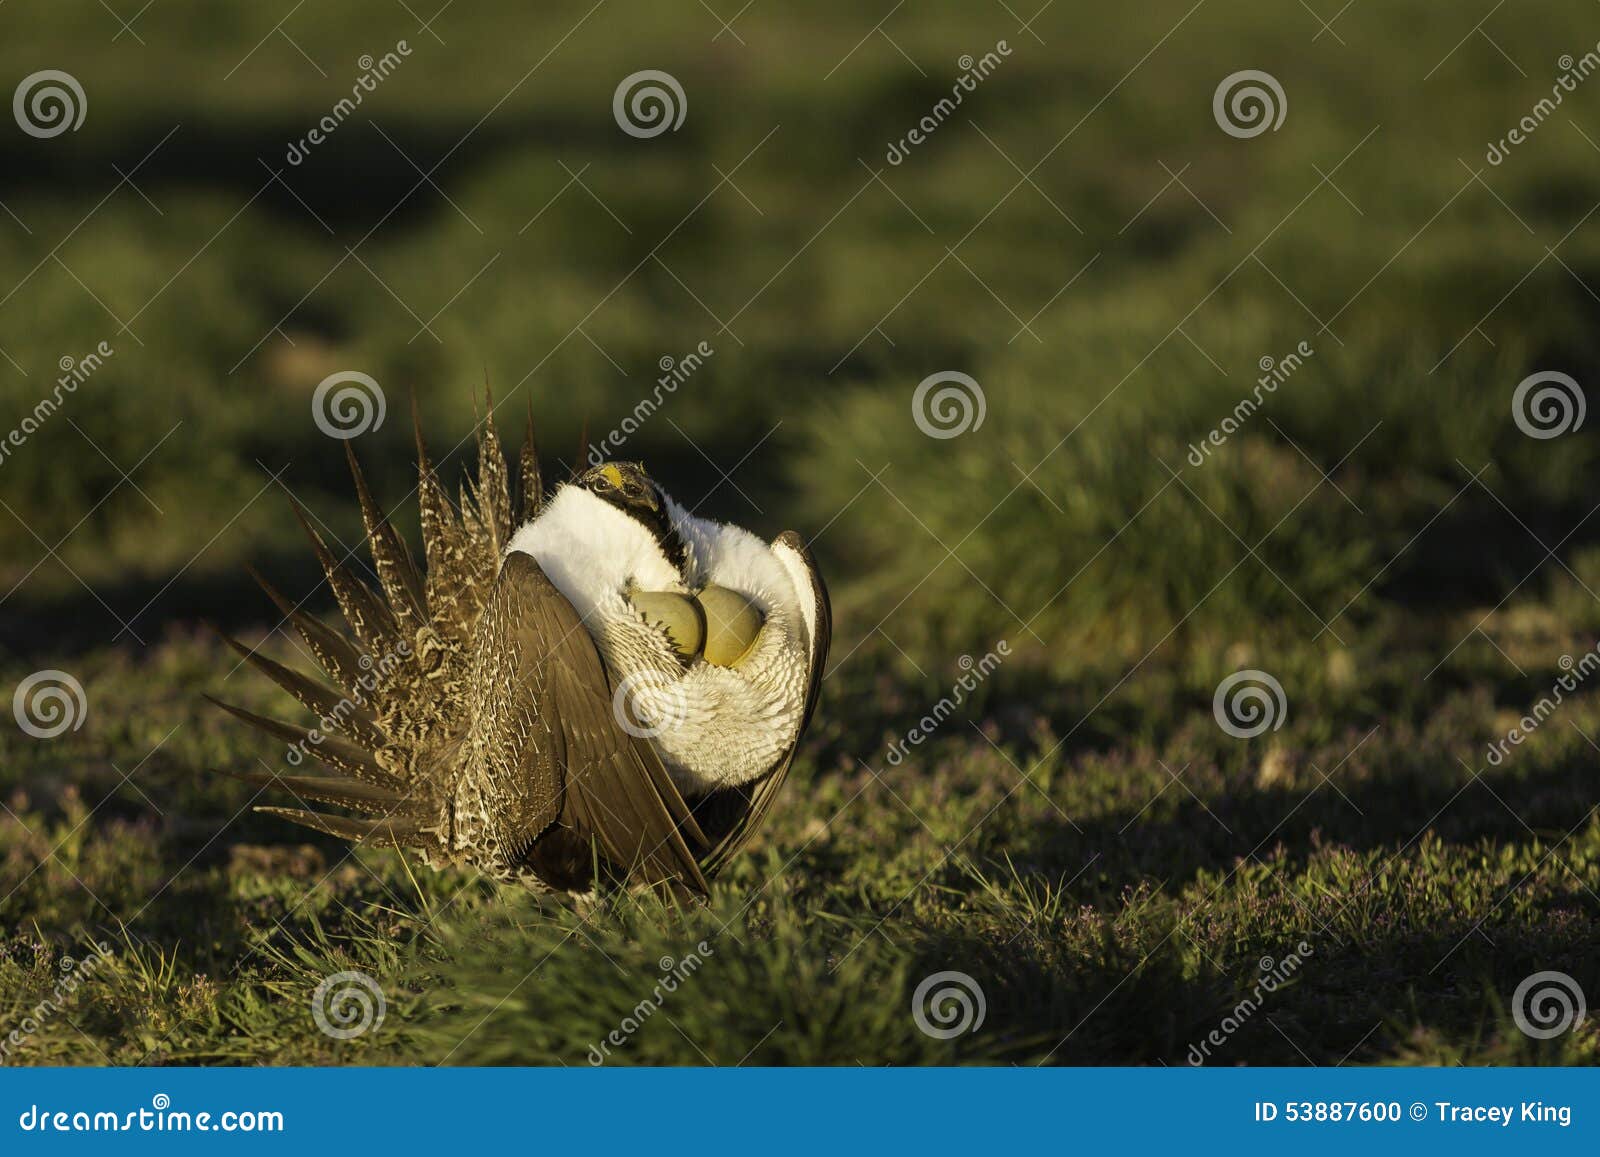 male sage grouse inflates it's air sacs while strutting on a lek in the golden morning light